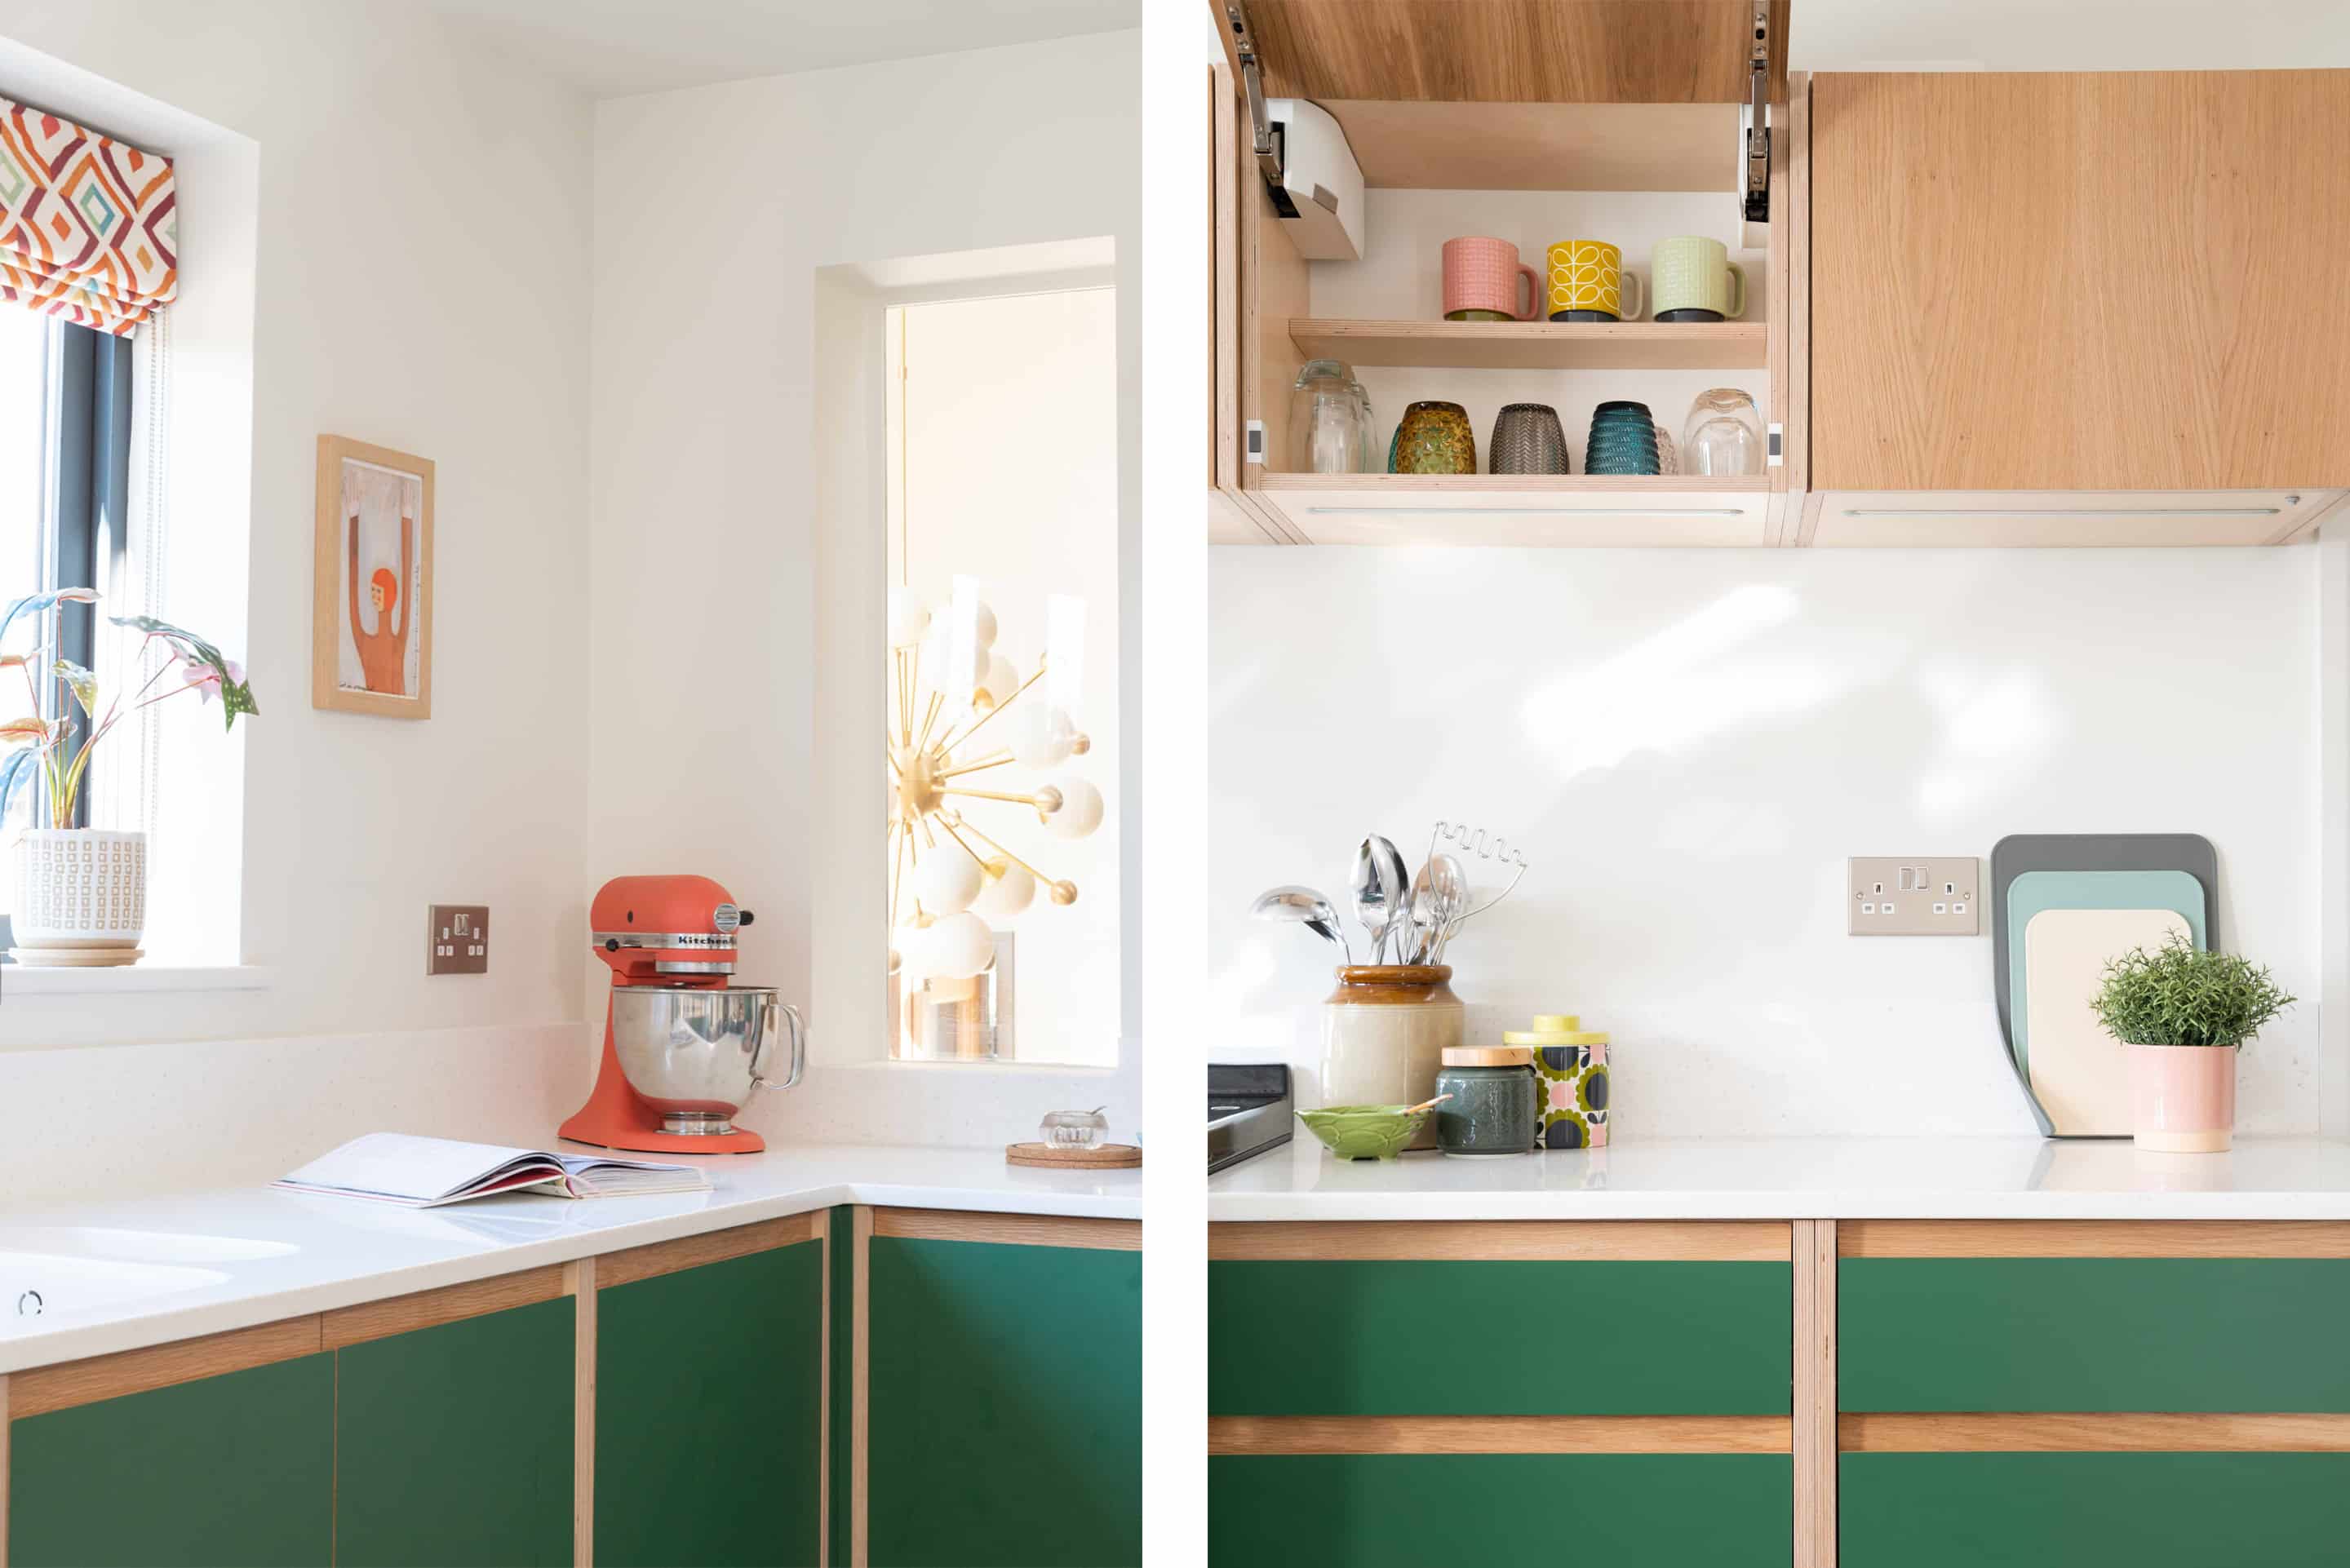 A handmade kitchen, with green melamine fronts and oak J-Pull handles, set into oak veneer birch ply cabinets with a white corian worksurface.